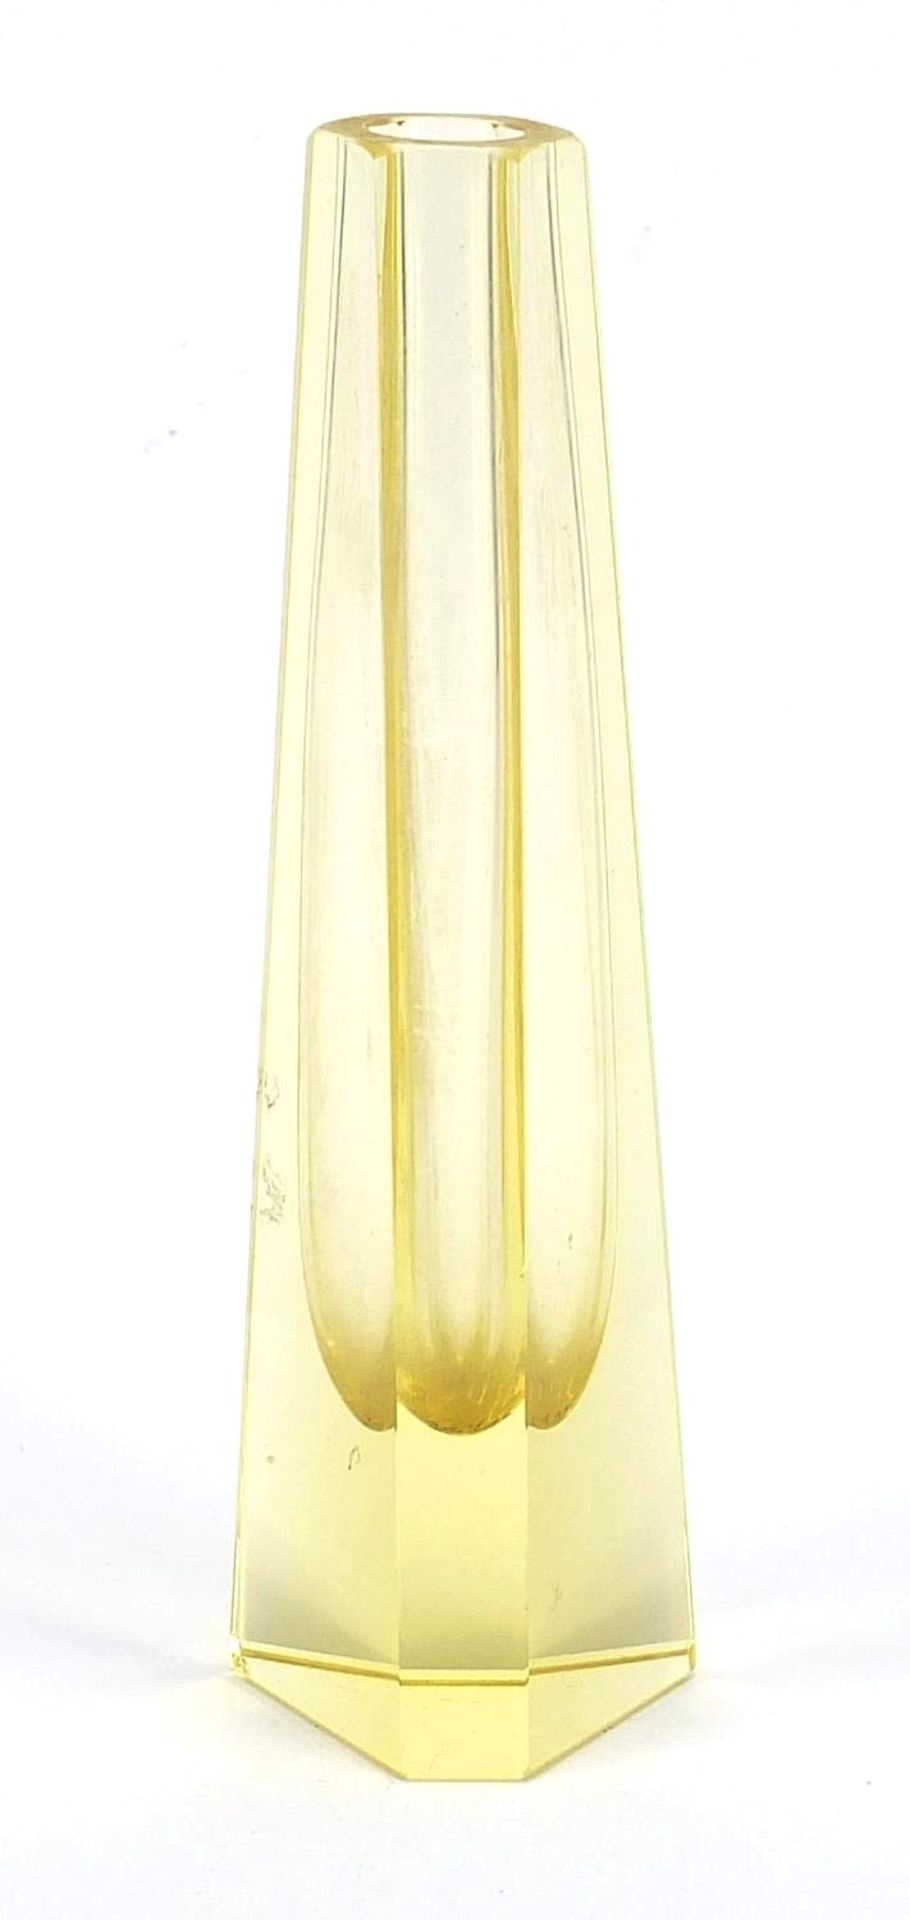 Triangular yellow glass vase with canted corners, possibly by Moser, 16cm high : For Further